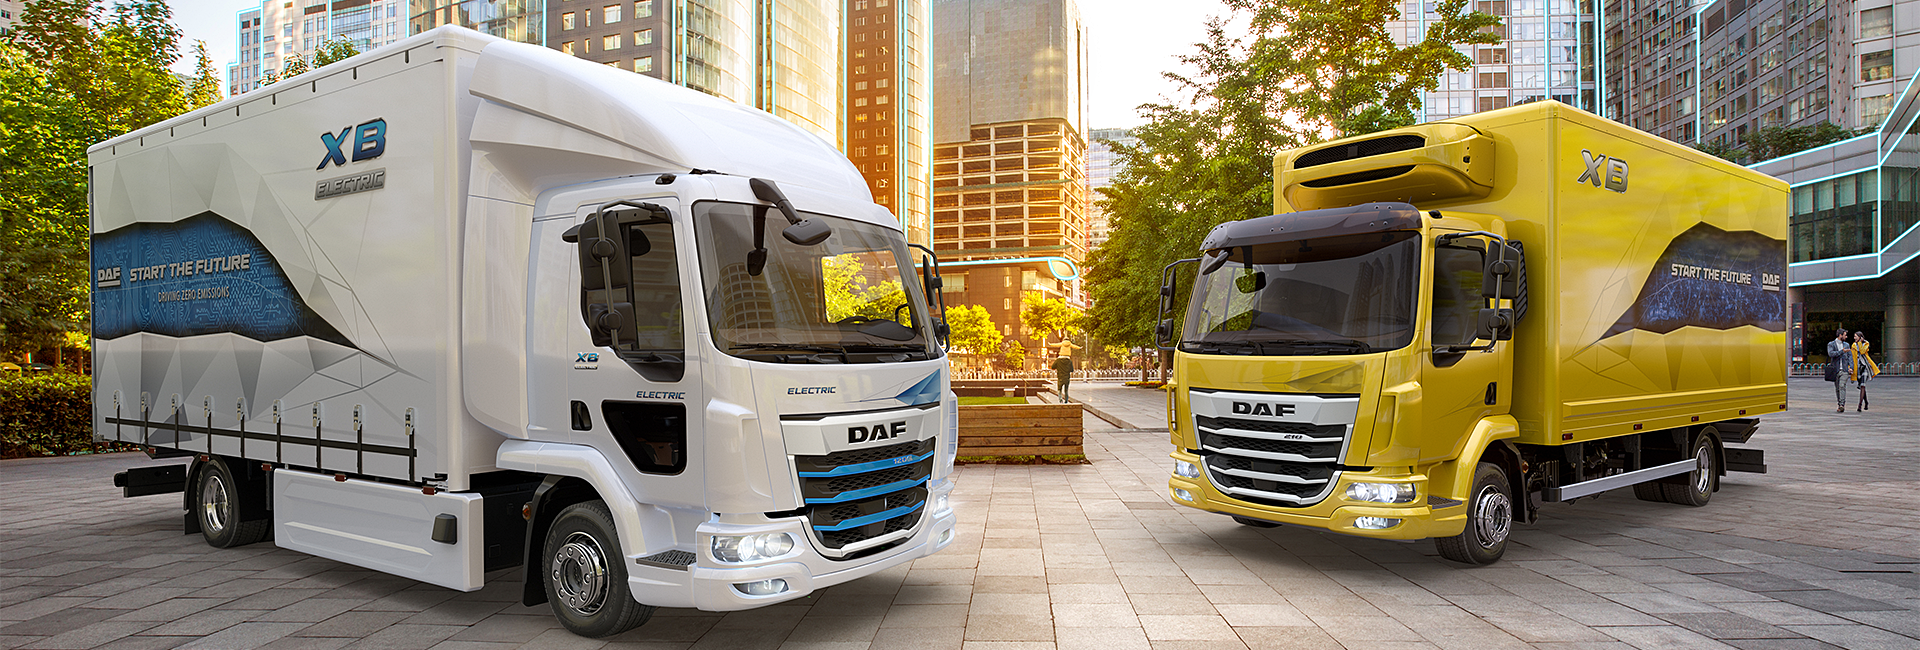 New-Generation-DAF-XB-Electric-and-XB-diesel-city-BSH085-HH